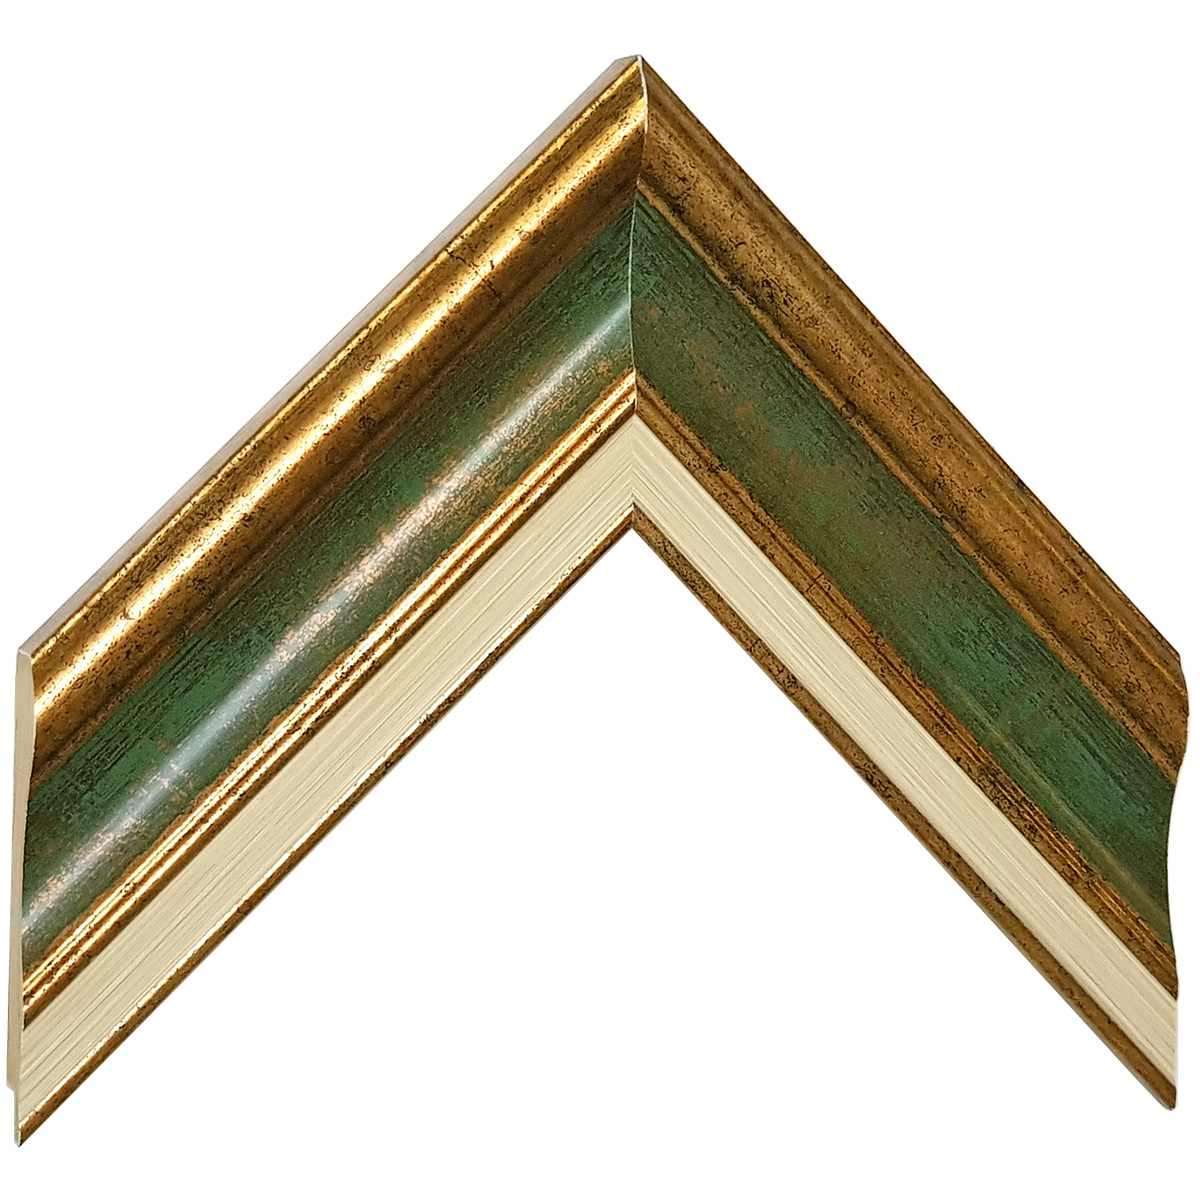 Moulding finger-jointed pine - width 61mm height 20 - Gold, green band - Sample